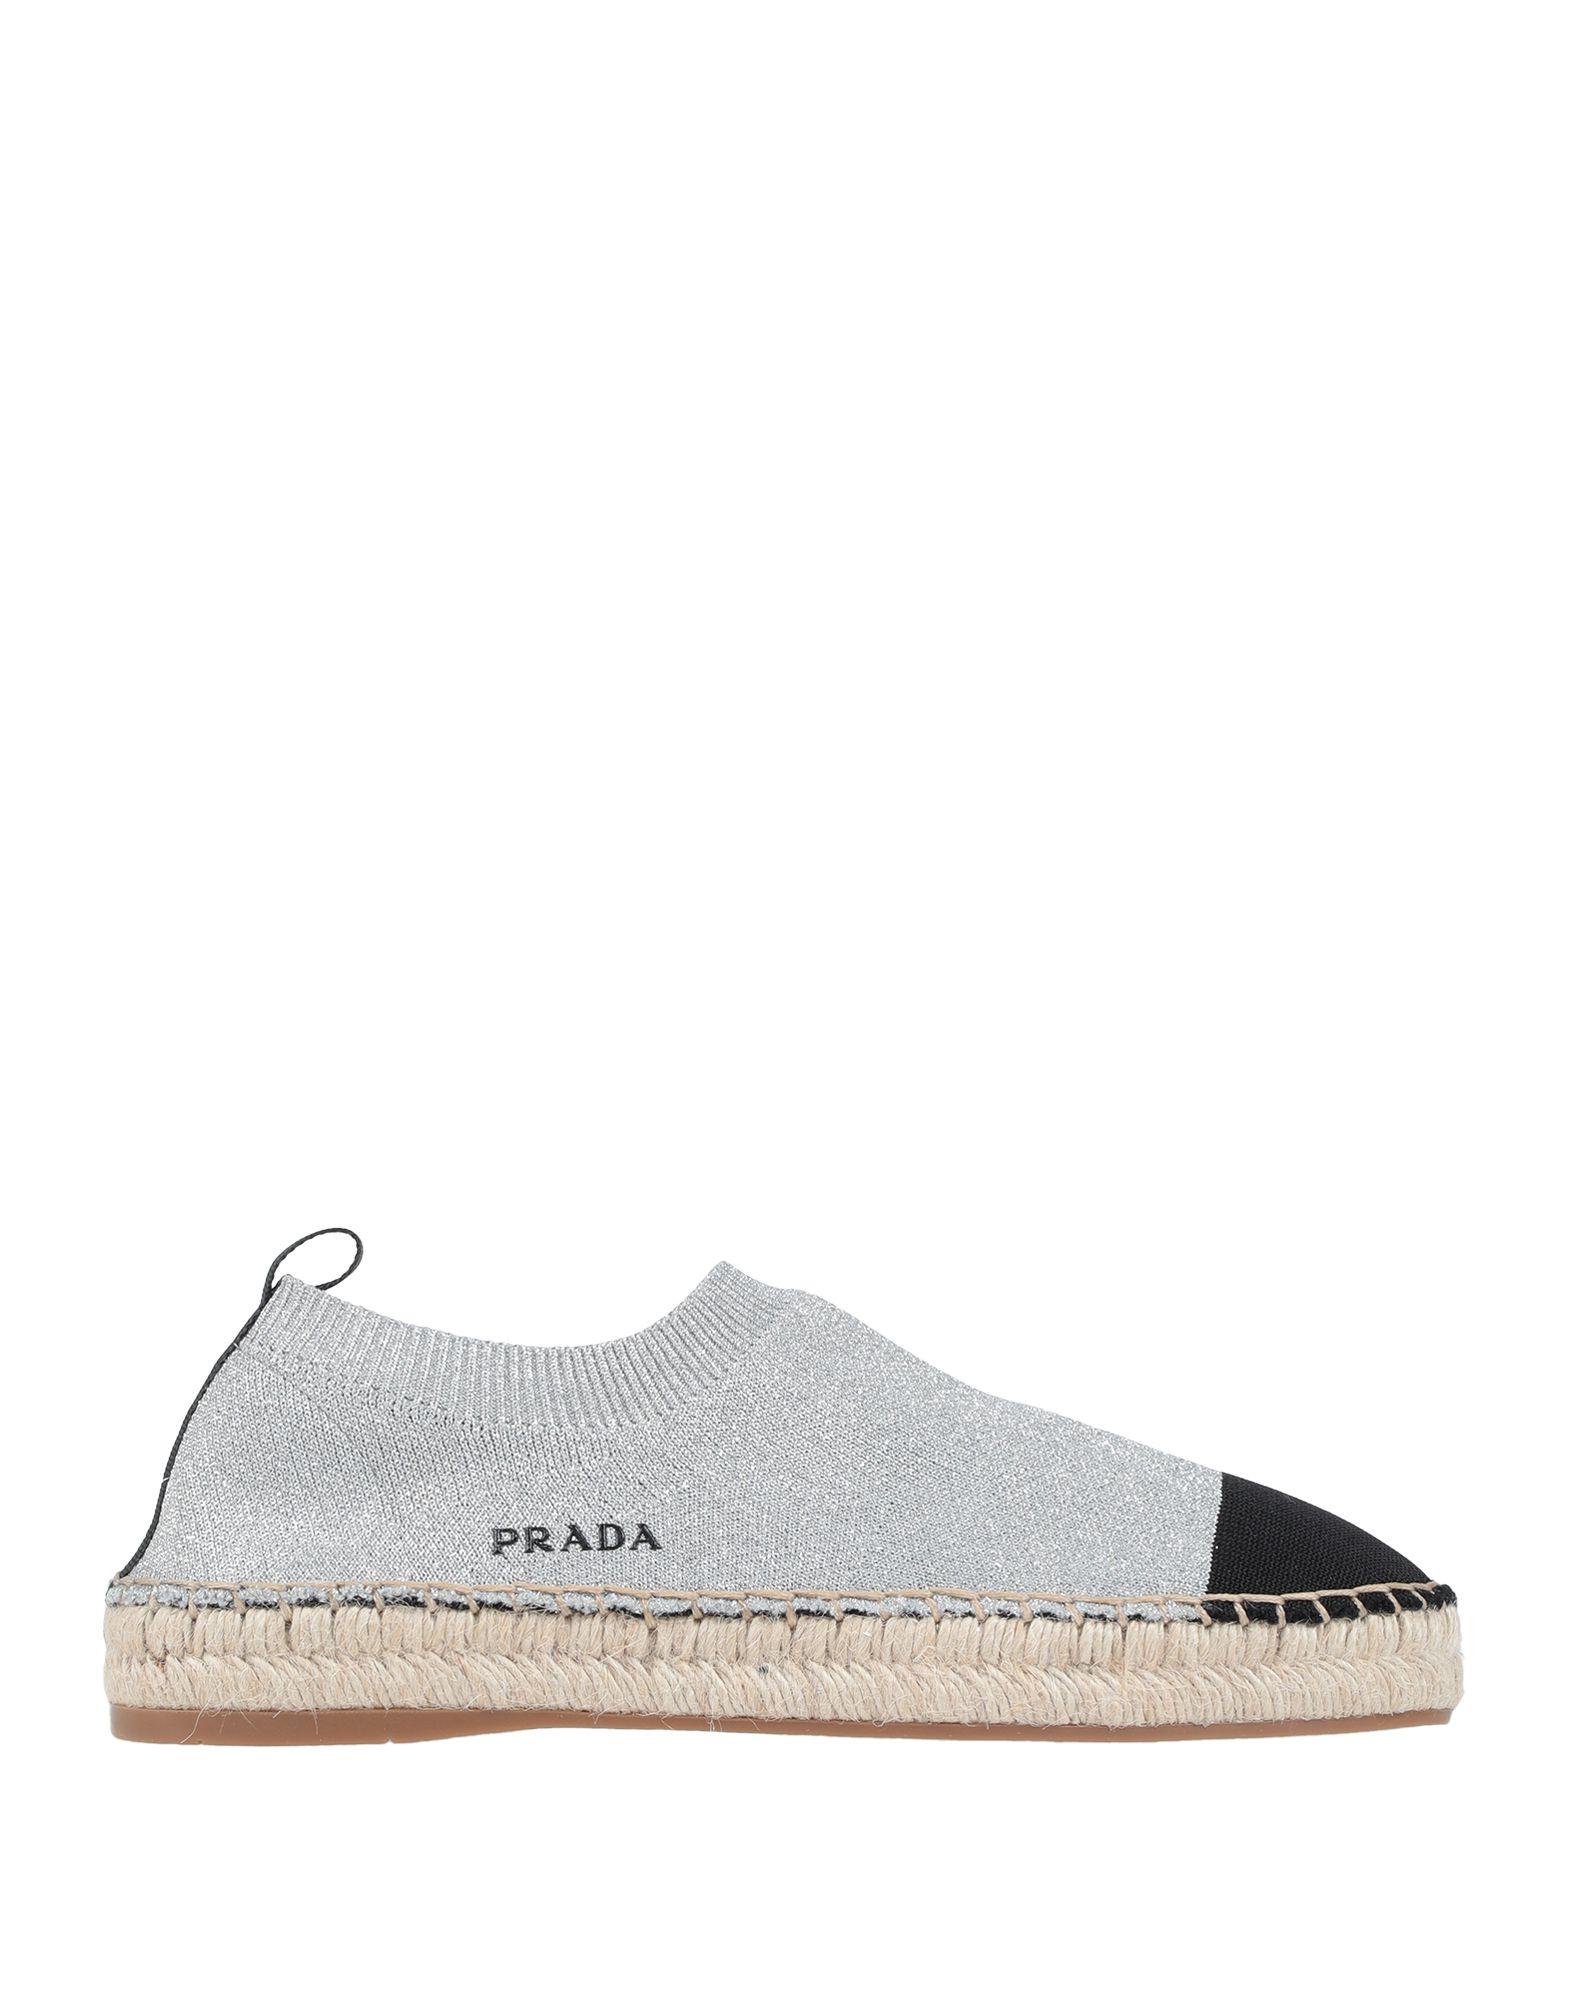 Prada Knitted Style Espadrilles in 